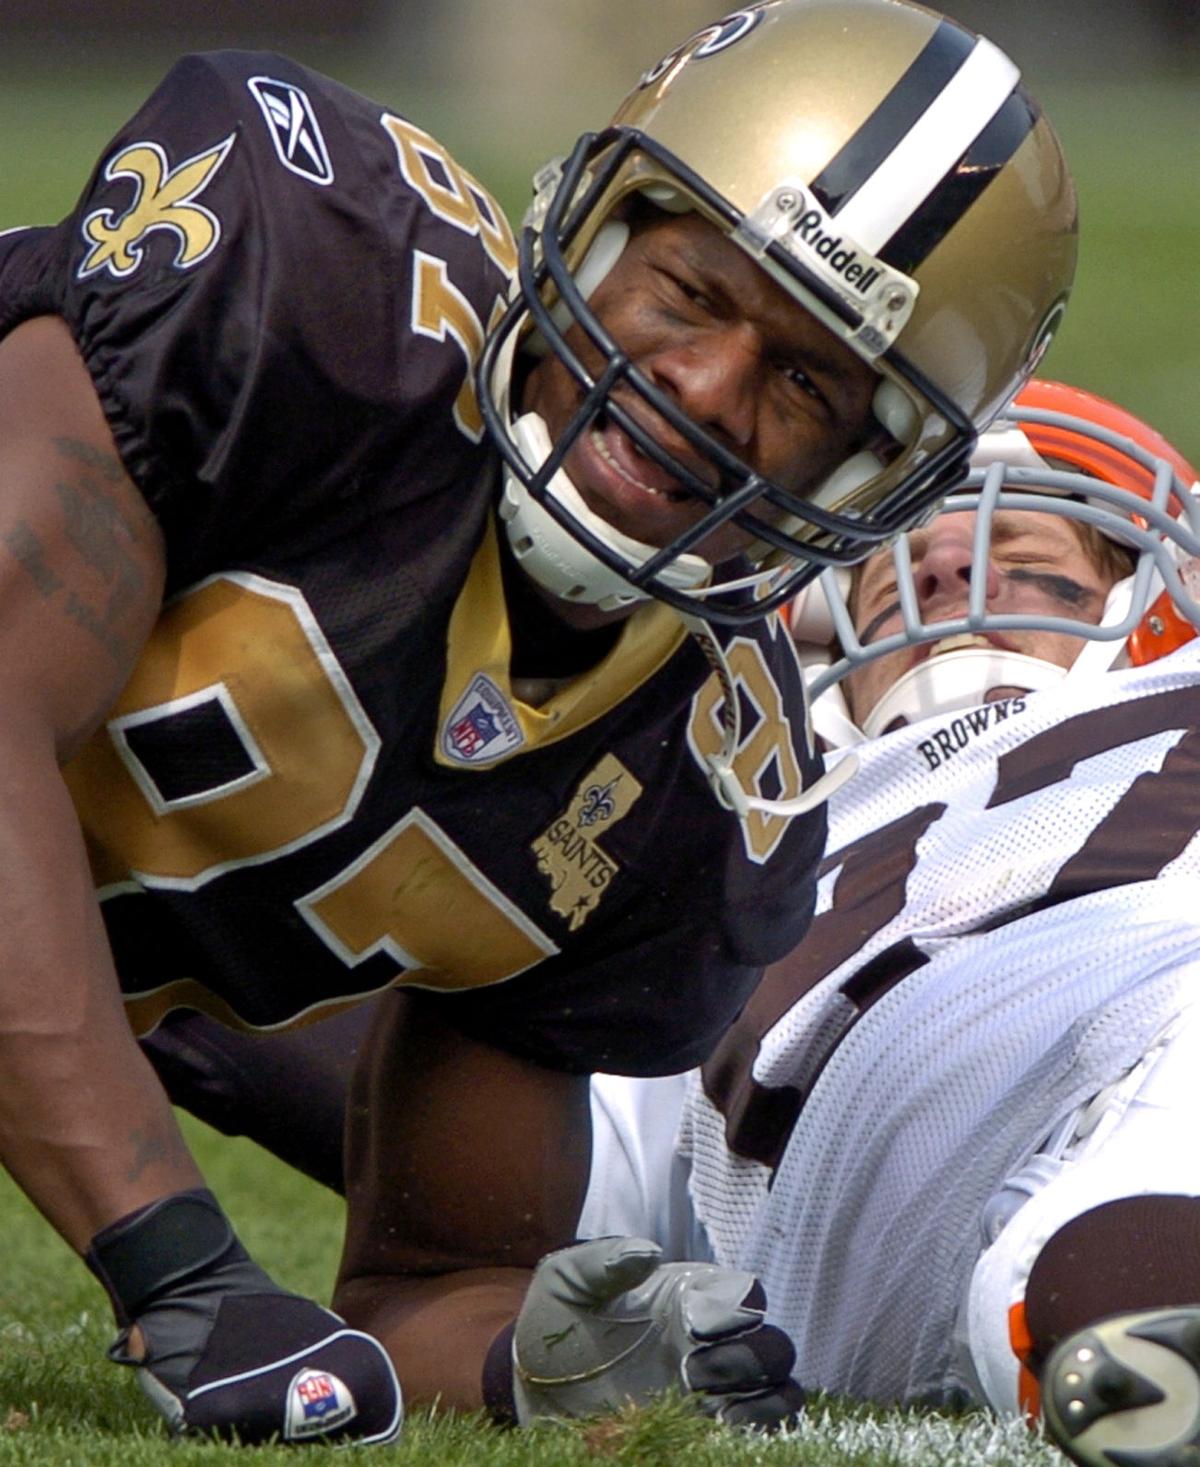 Joe Horn 9 Other Former Nfl Players Accused Of Defrauding